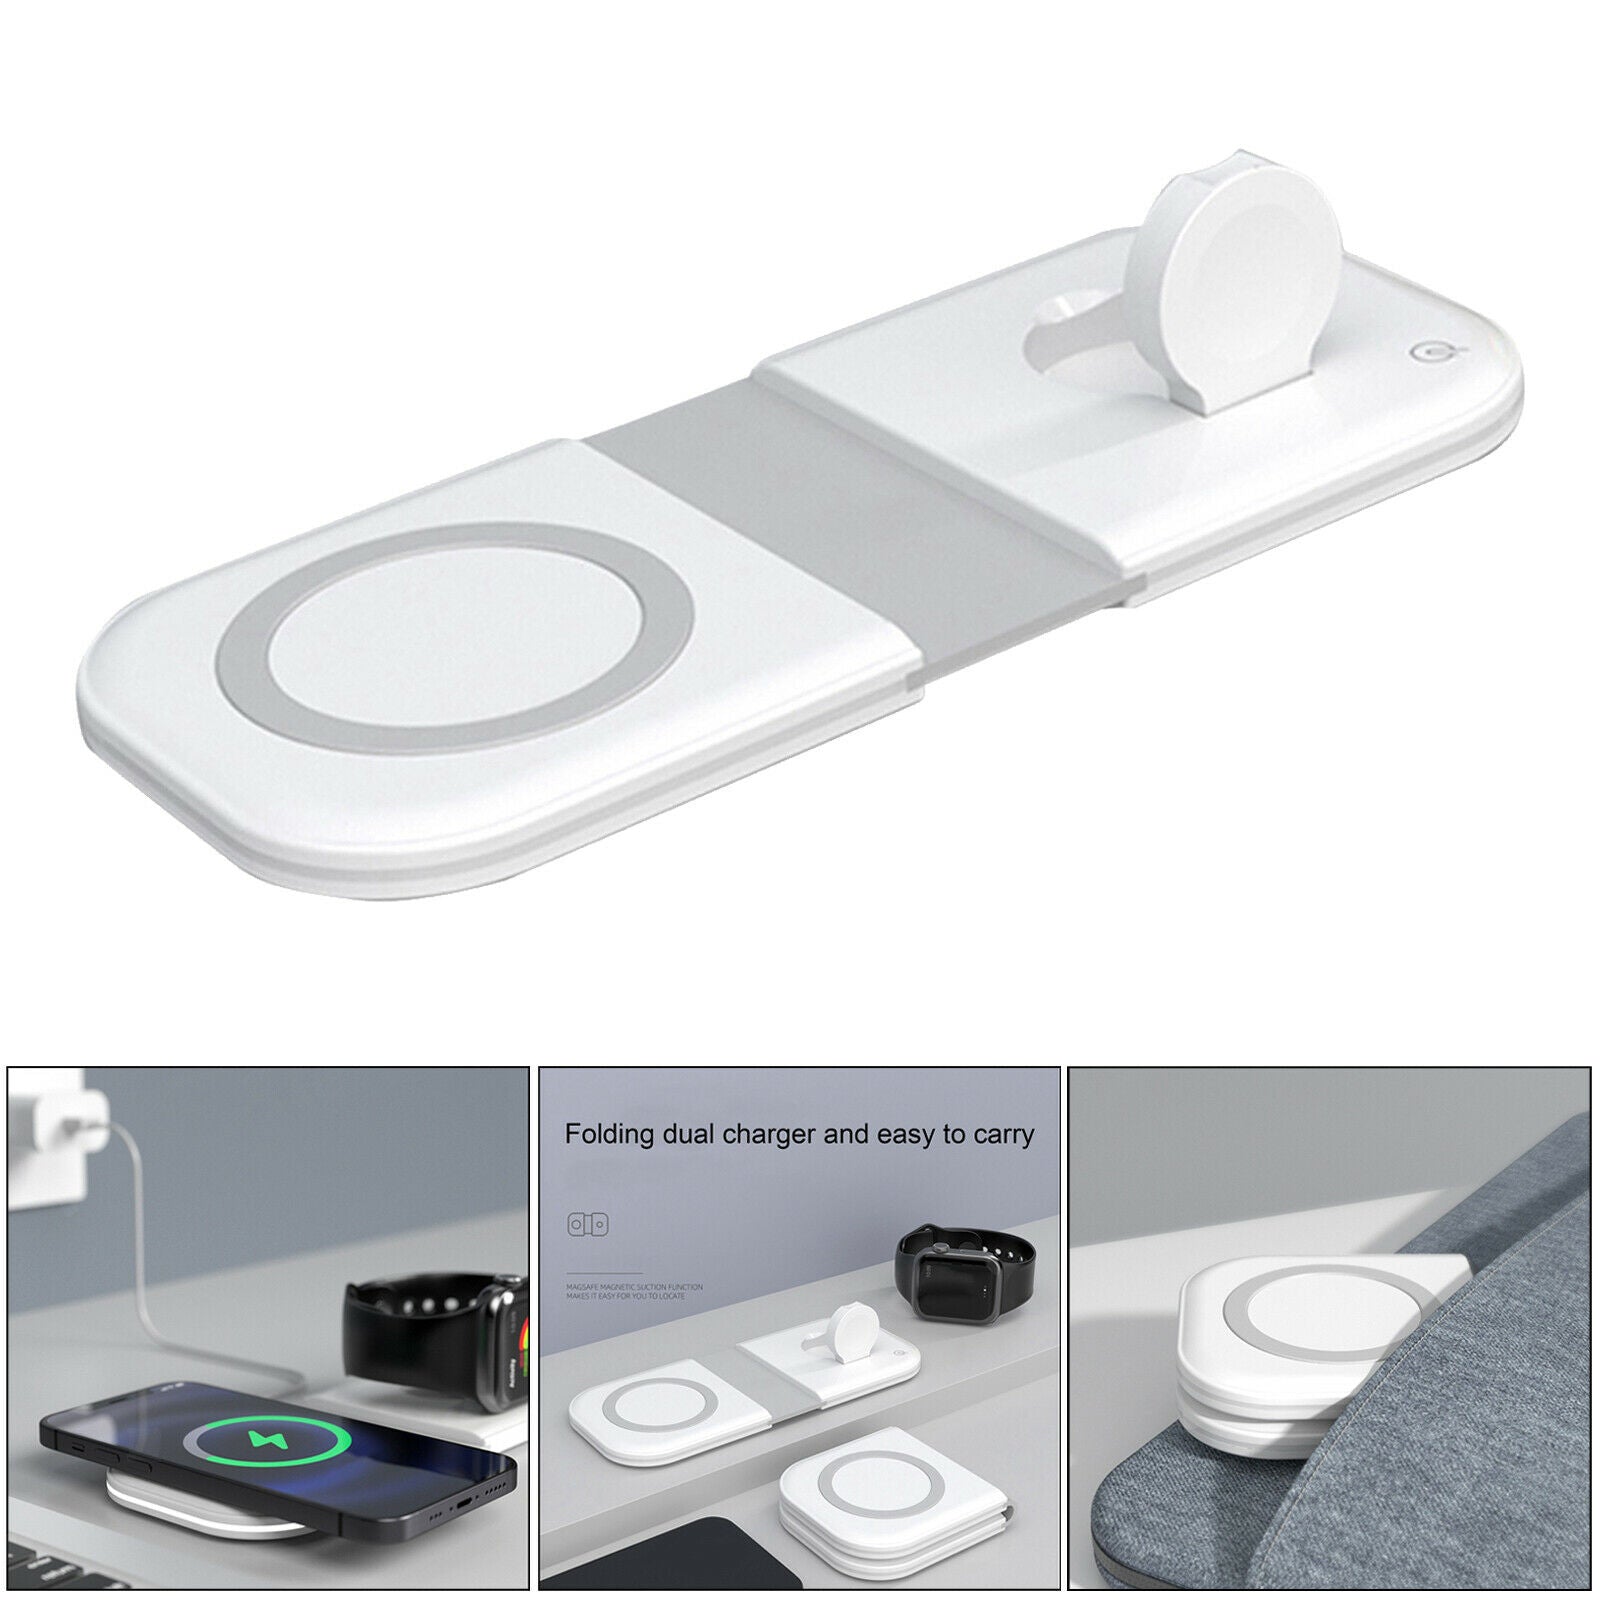 2-in-1 Foldable Fast Charging Qi Dual Magnetic Wireless Charger Stand Dock